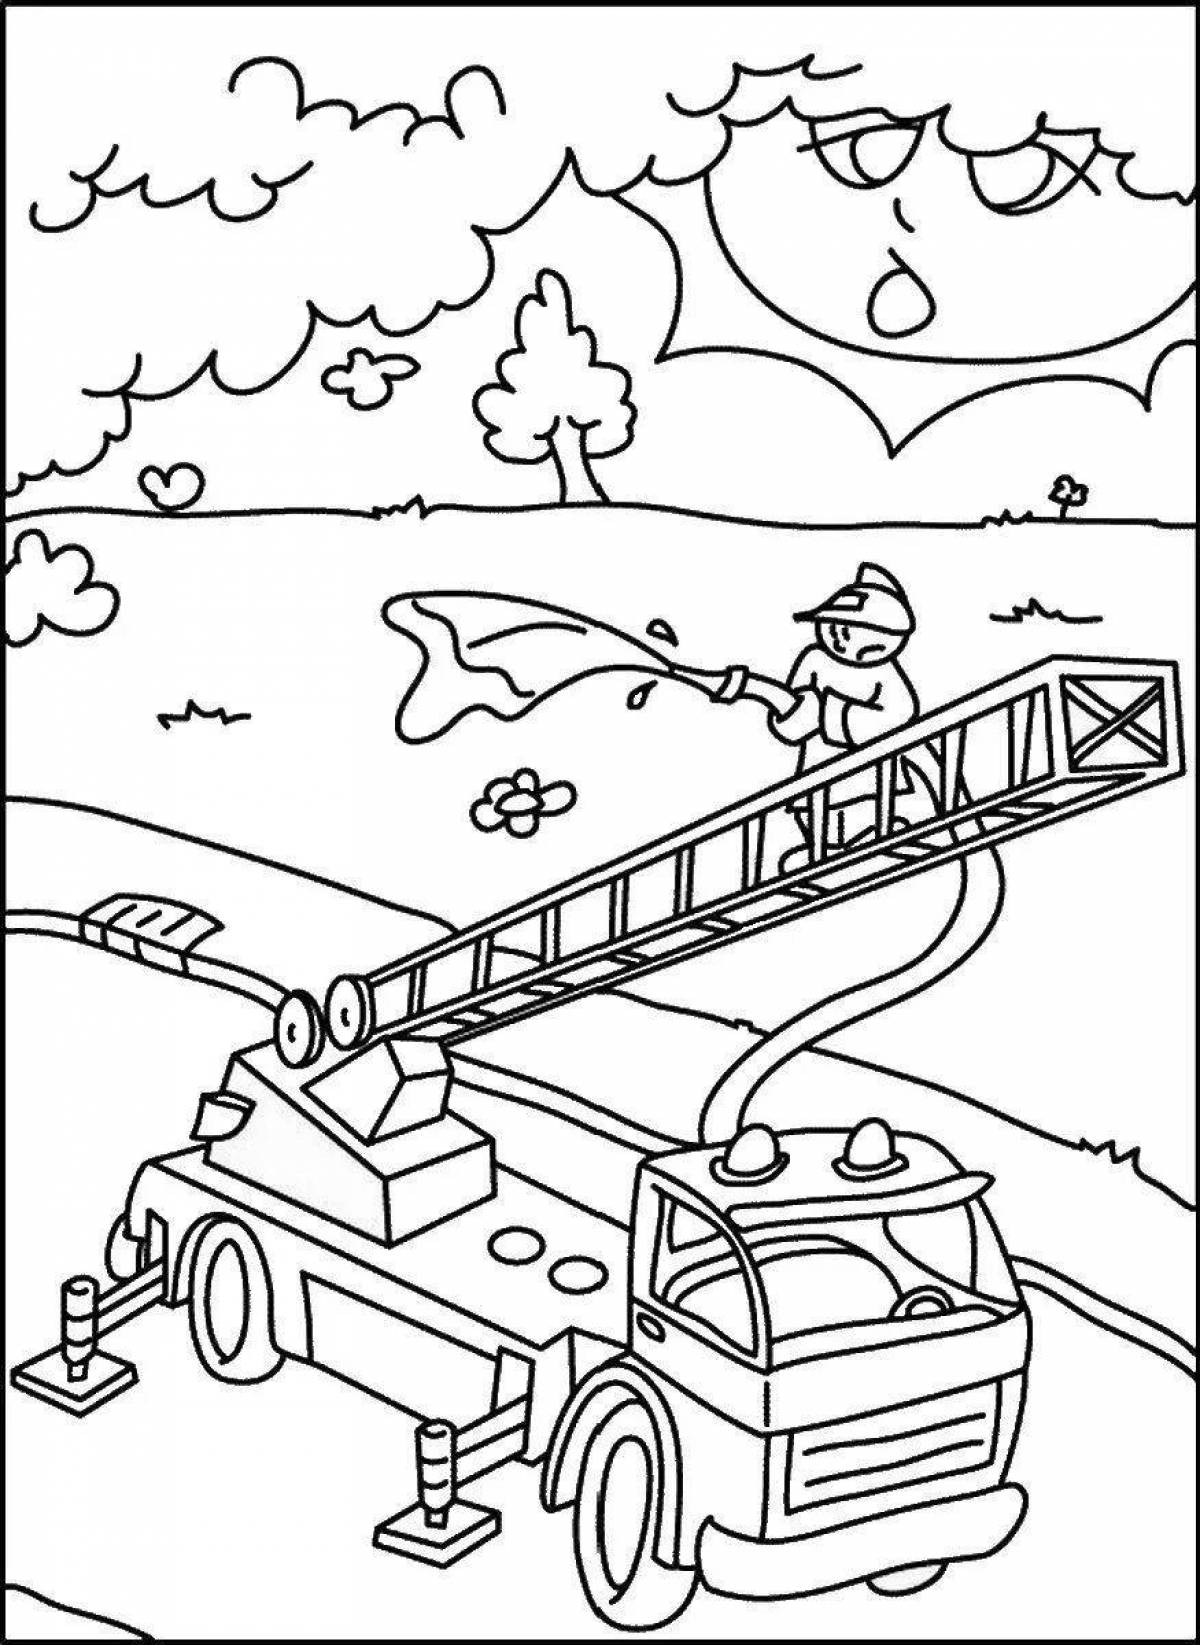 High heat fire coloring page